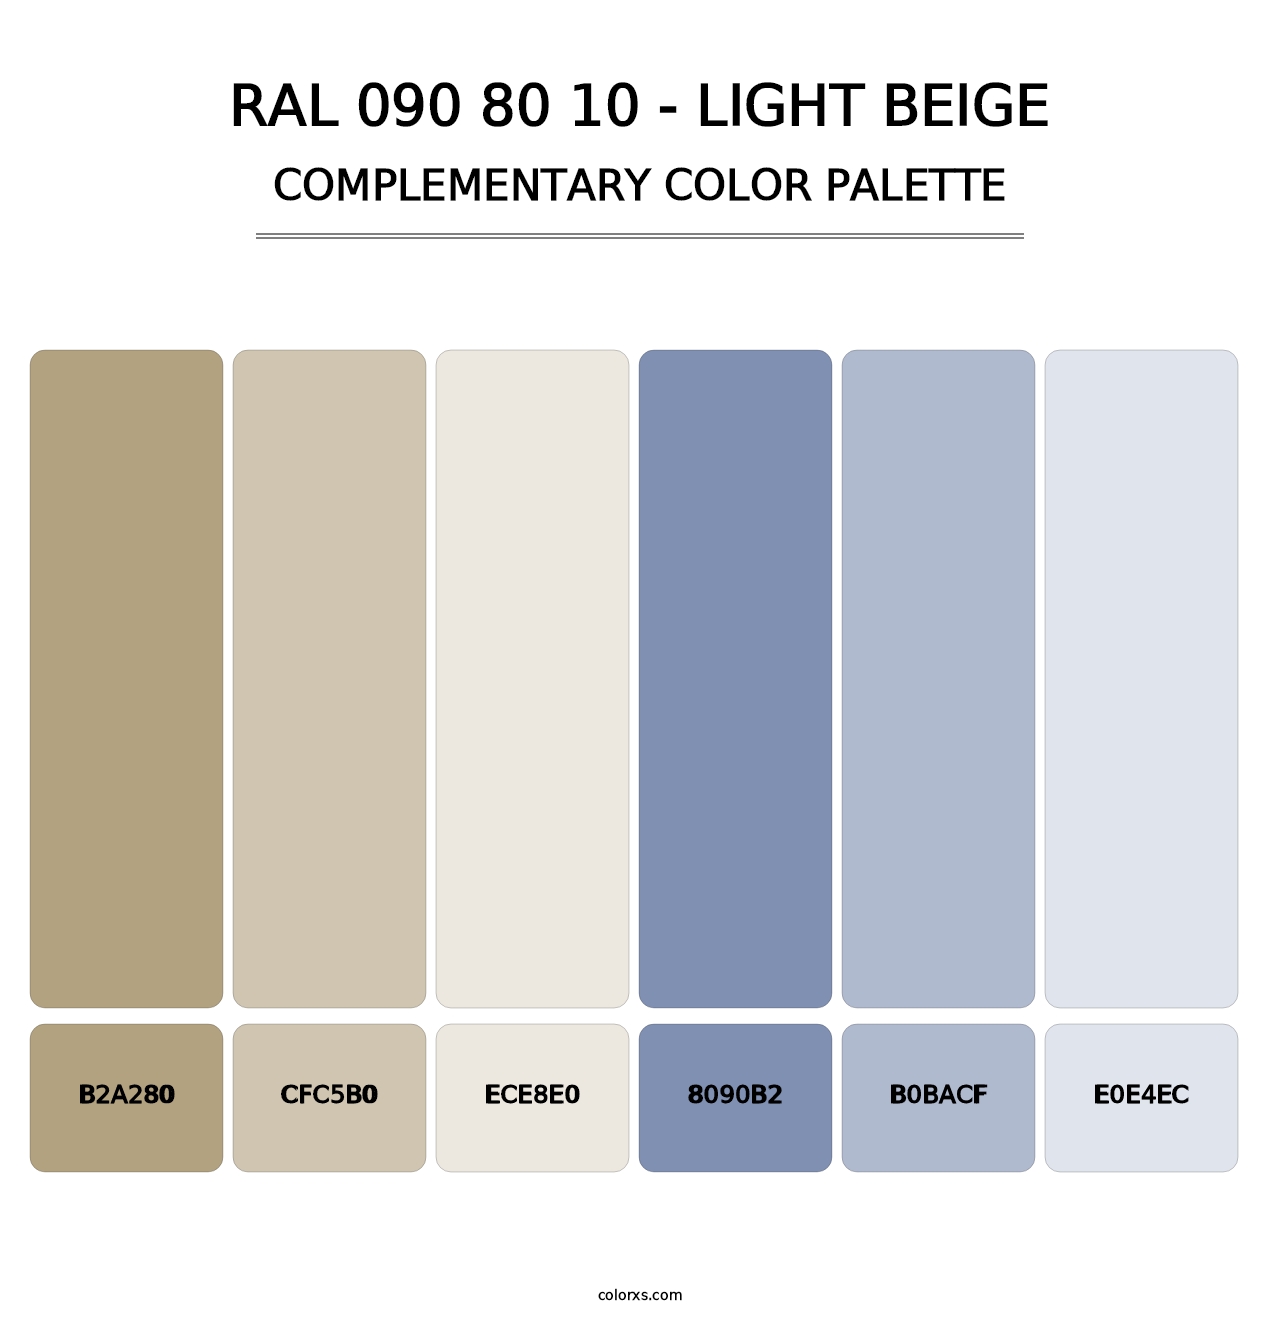 RAL 090 80 10 - Light Beige - Complementary Color Palette